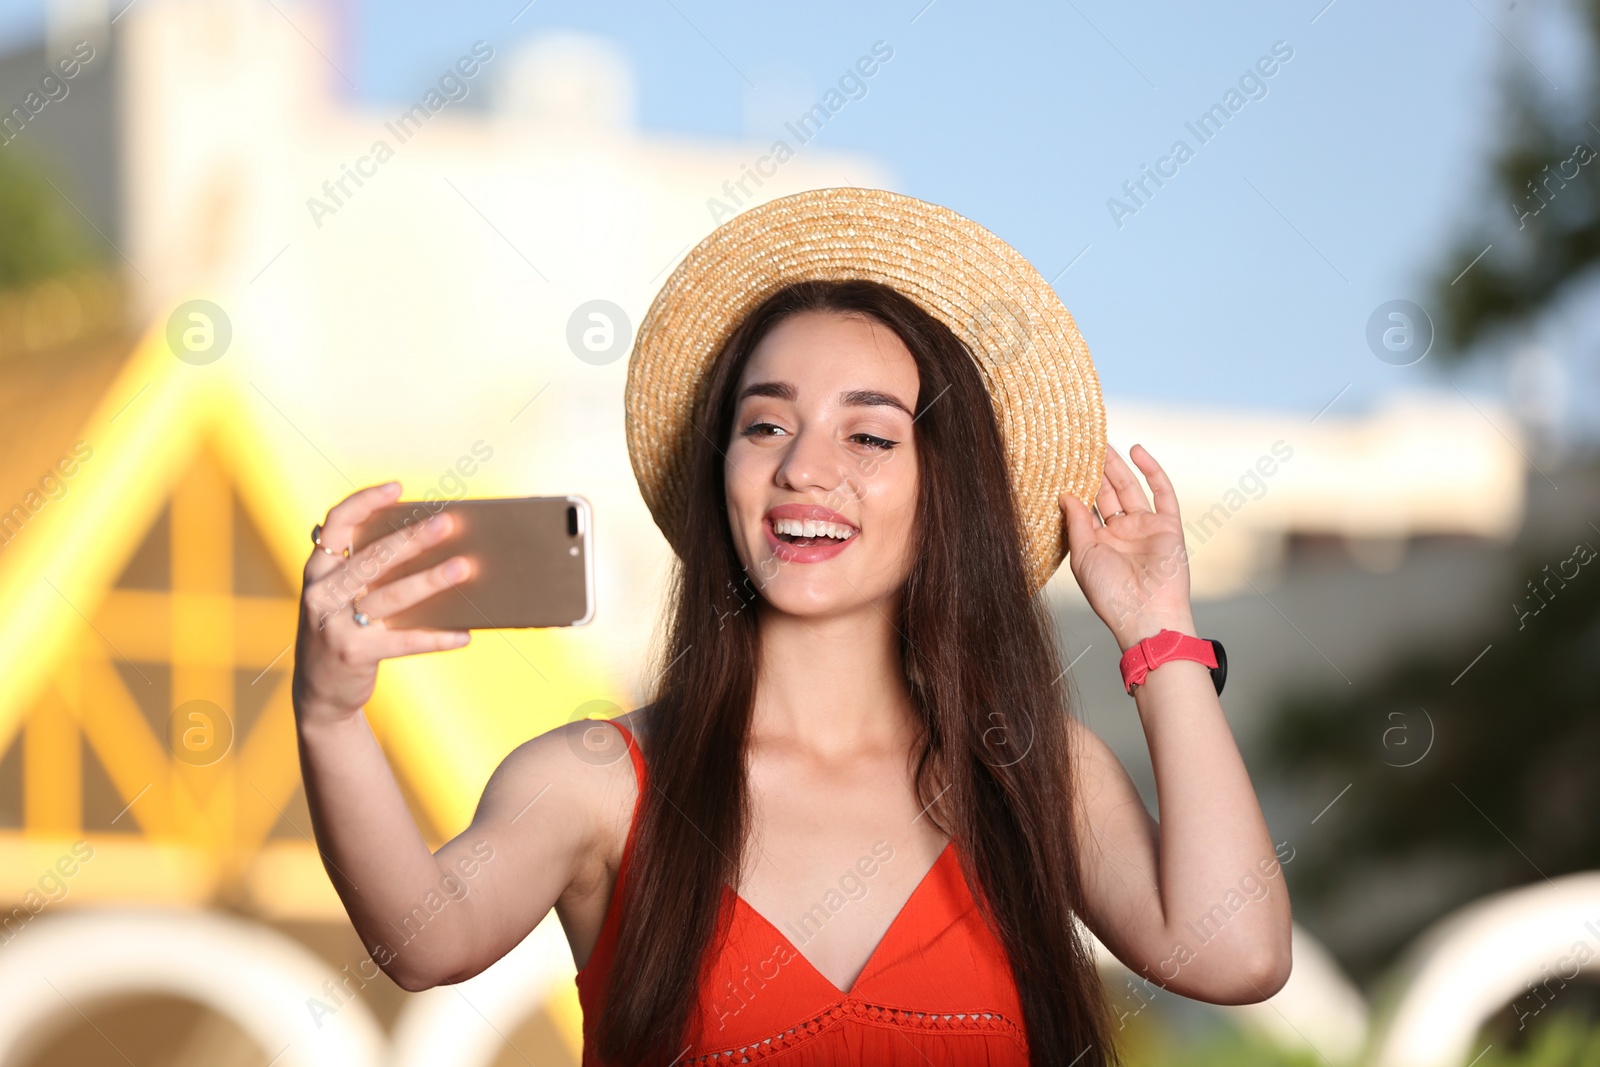 Photo of Happy young woman taking selfie outdoors on sunny day